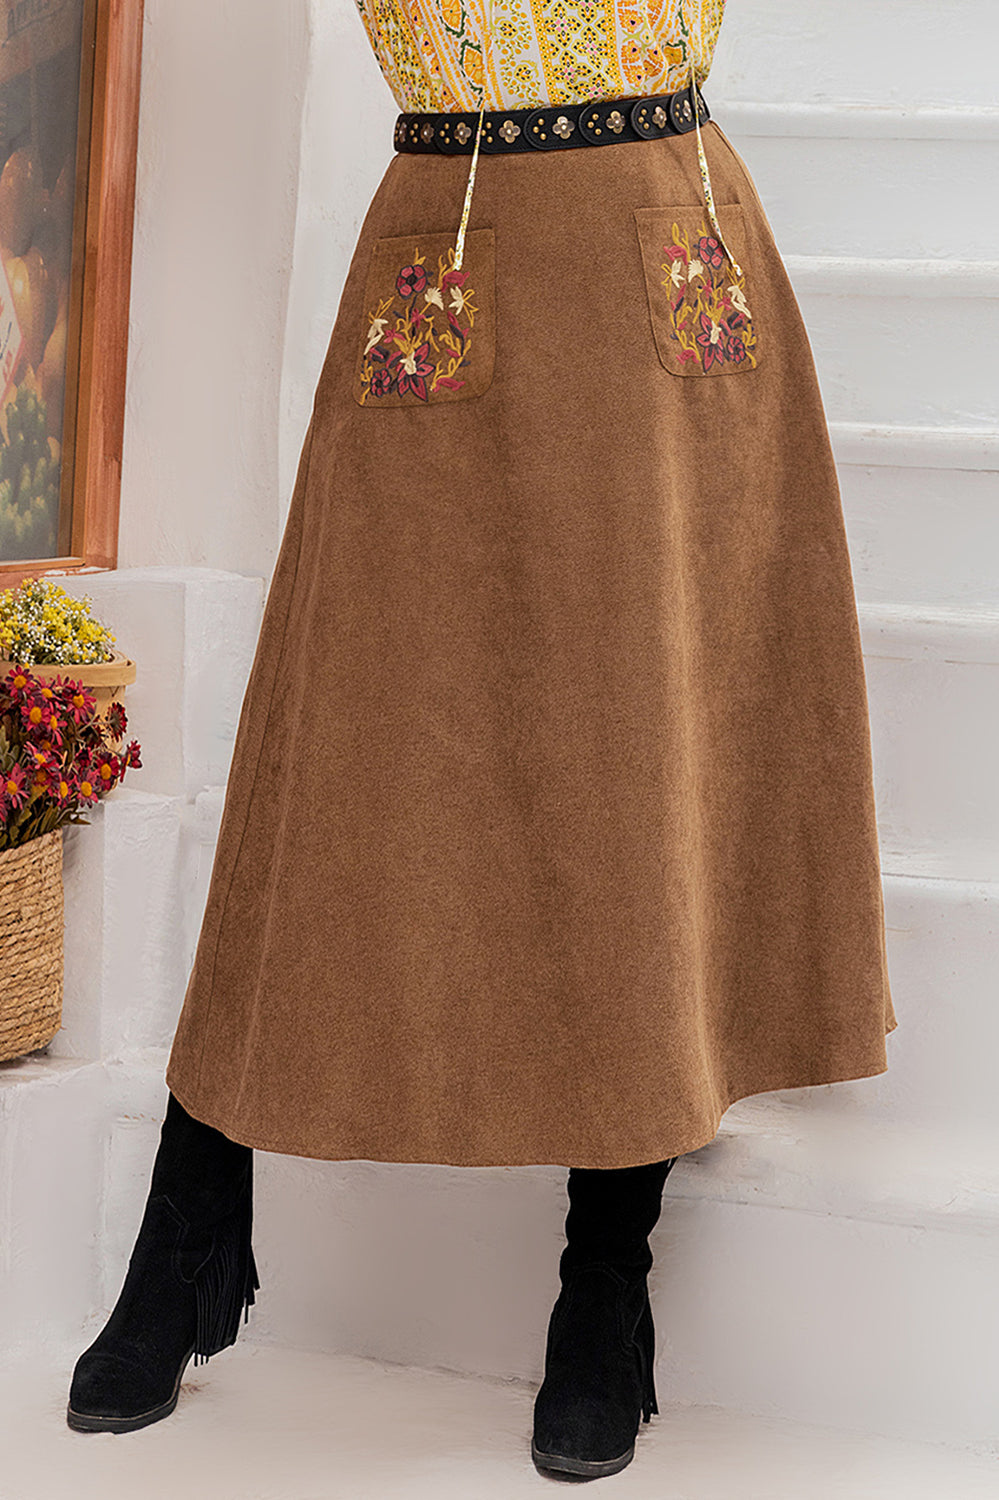 Embroidered Pocketed High Waist Skirt Casual Chic Boutique